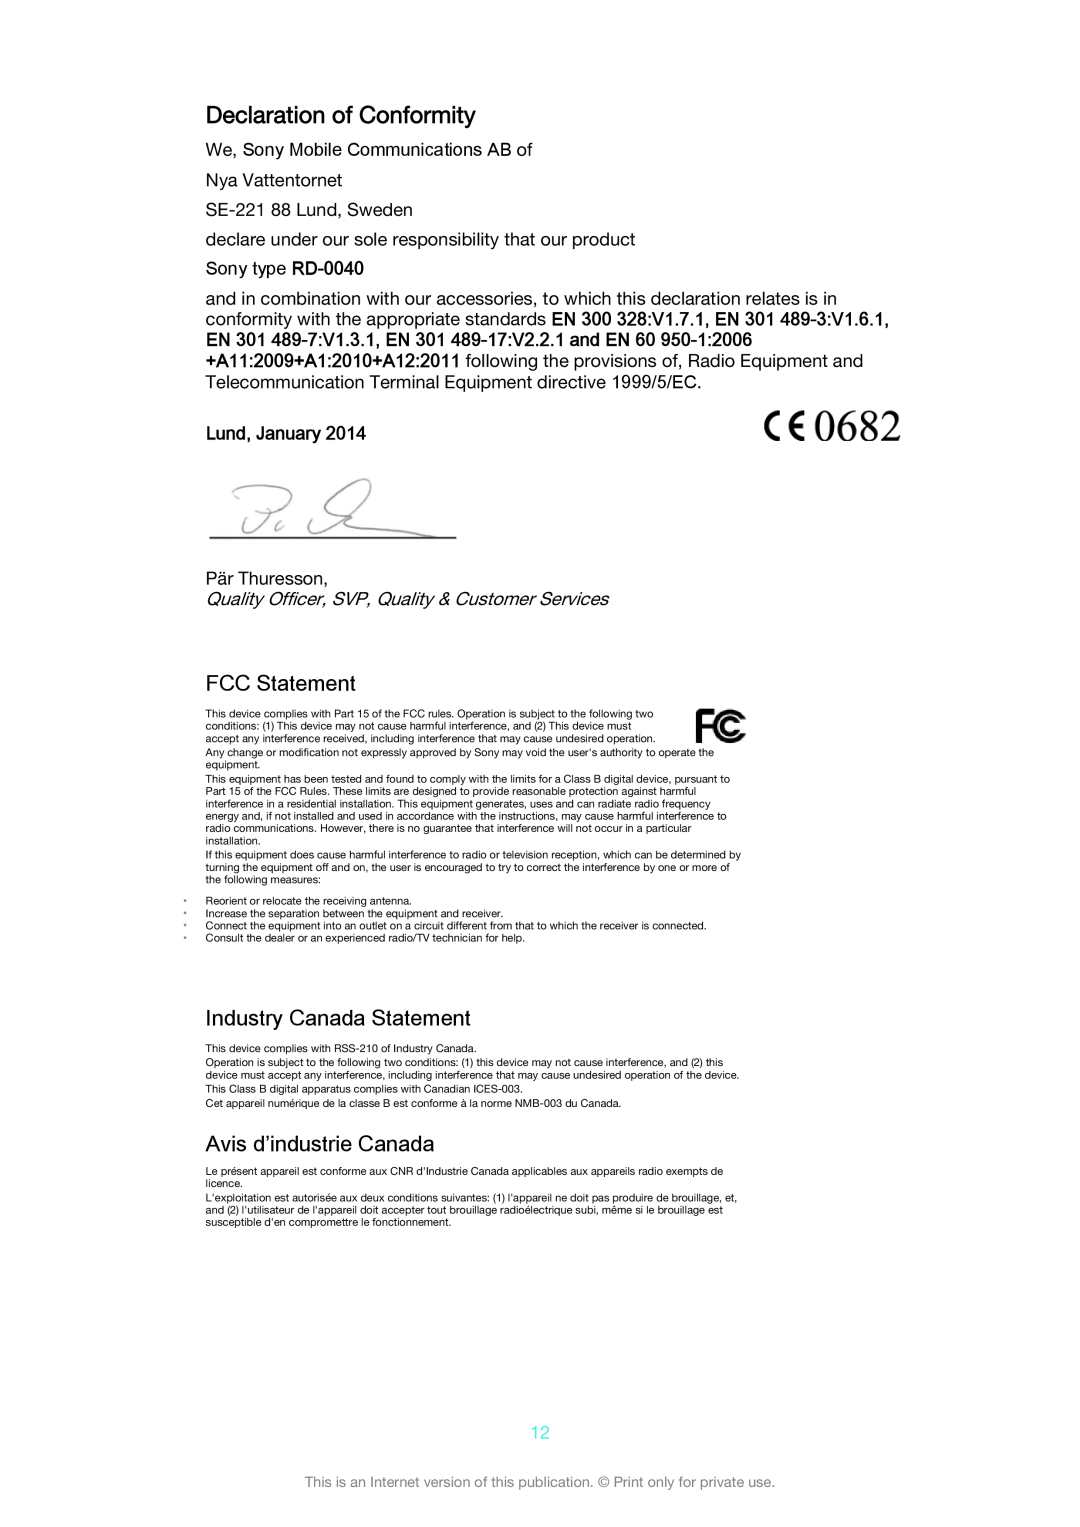 Sony SBH80 Declaration of Conformity, FCC Statement, Industry Canada Statement, Avis d’industrie Canada, Lund, January 